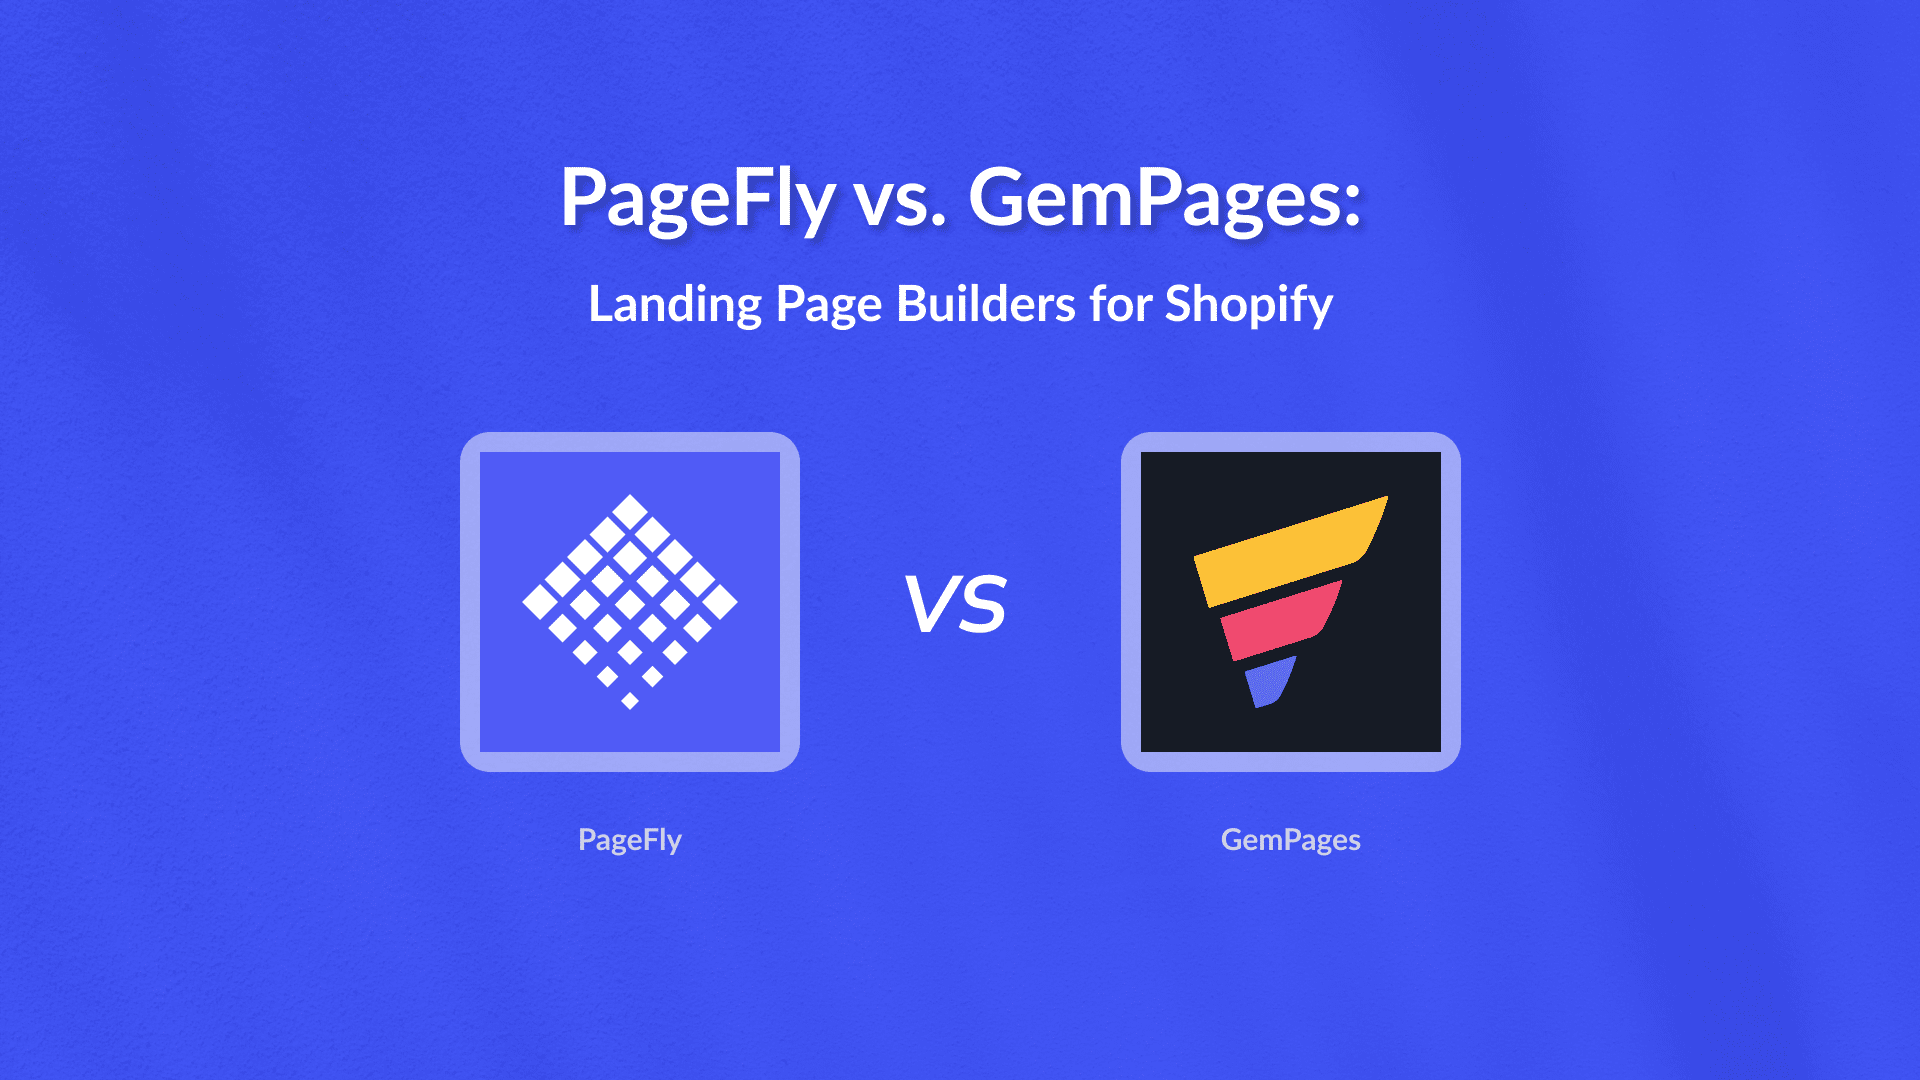 KeepShoppers cover image showcasing PageFly and GemPages logos